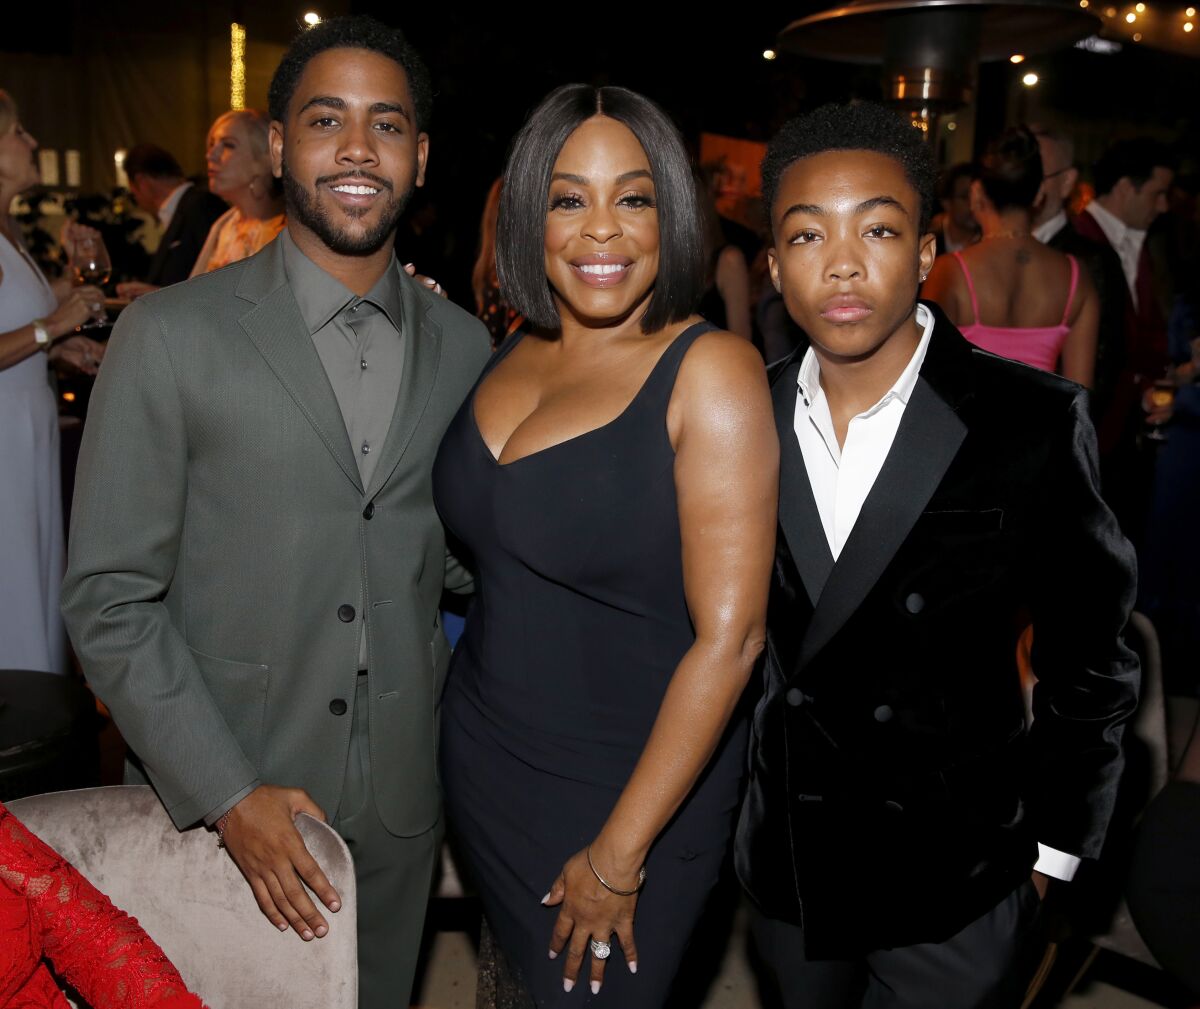 Jharrel Jerome, from left, Niecy Nash and Asante Blackk, Emmy nominees from "When They See Us," attend a Television Academy reception Sept. 20.